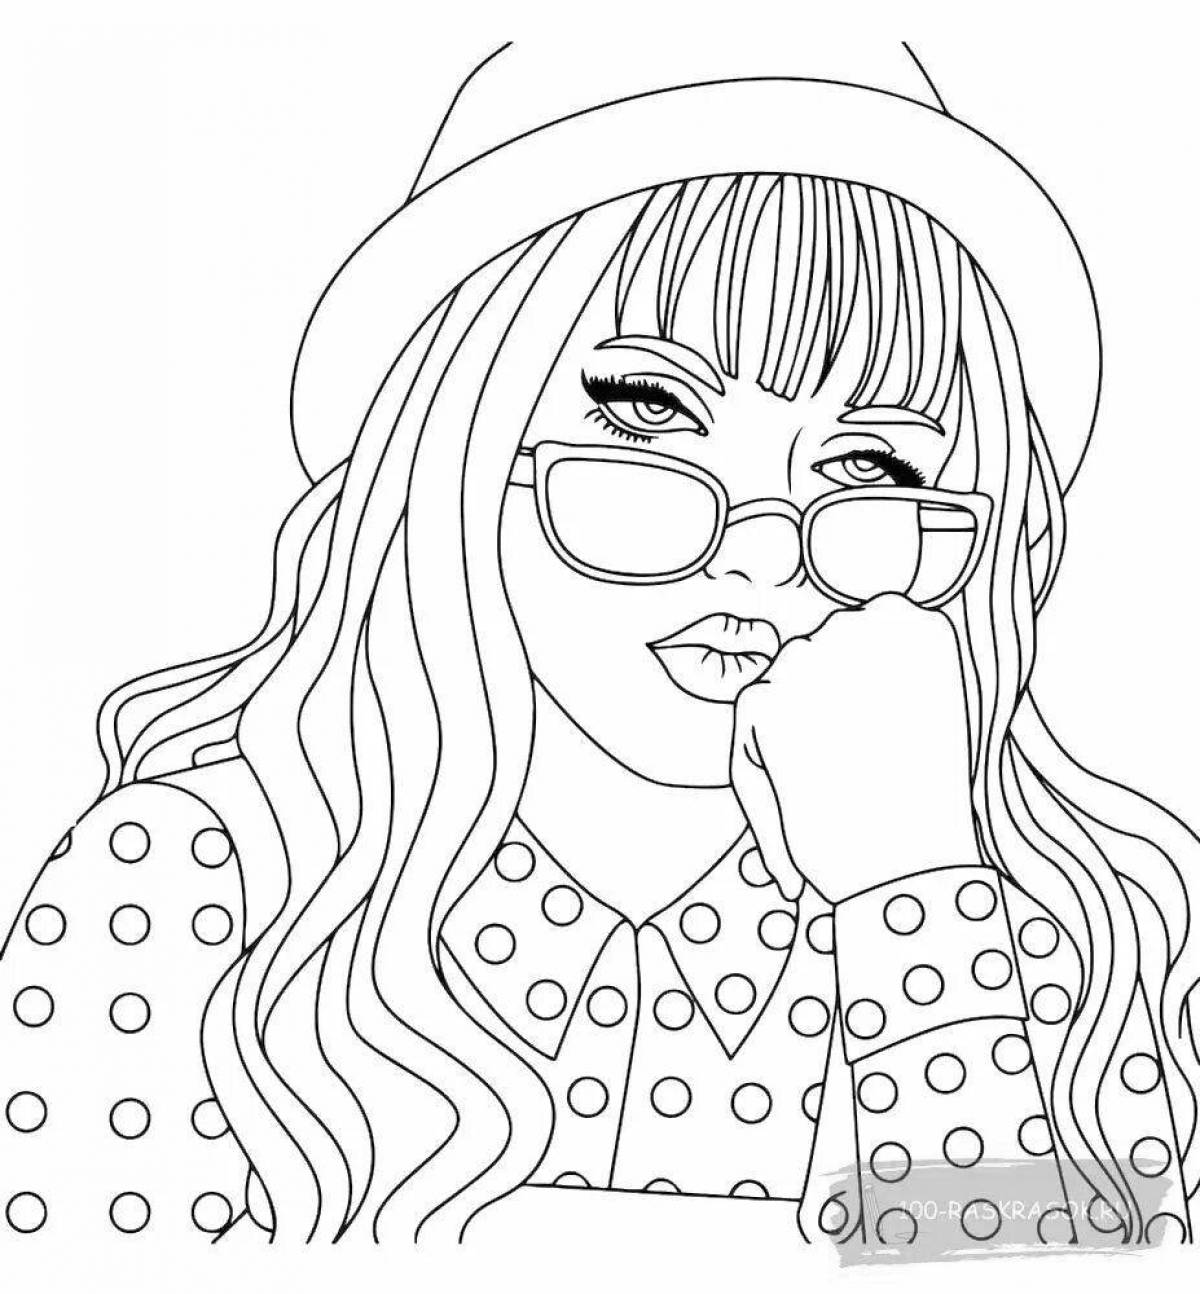 Zany 13 years cool coloring page